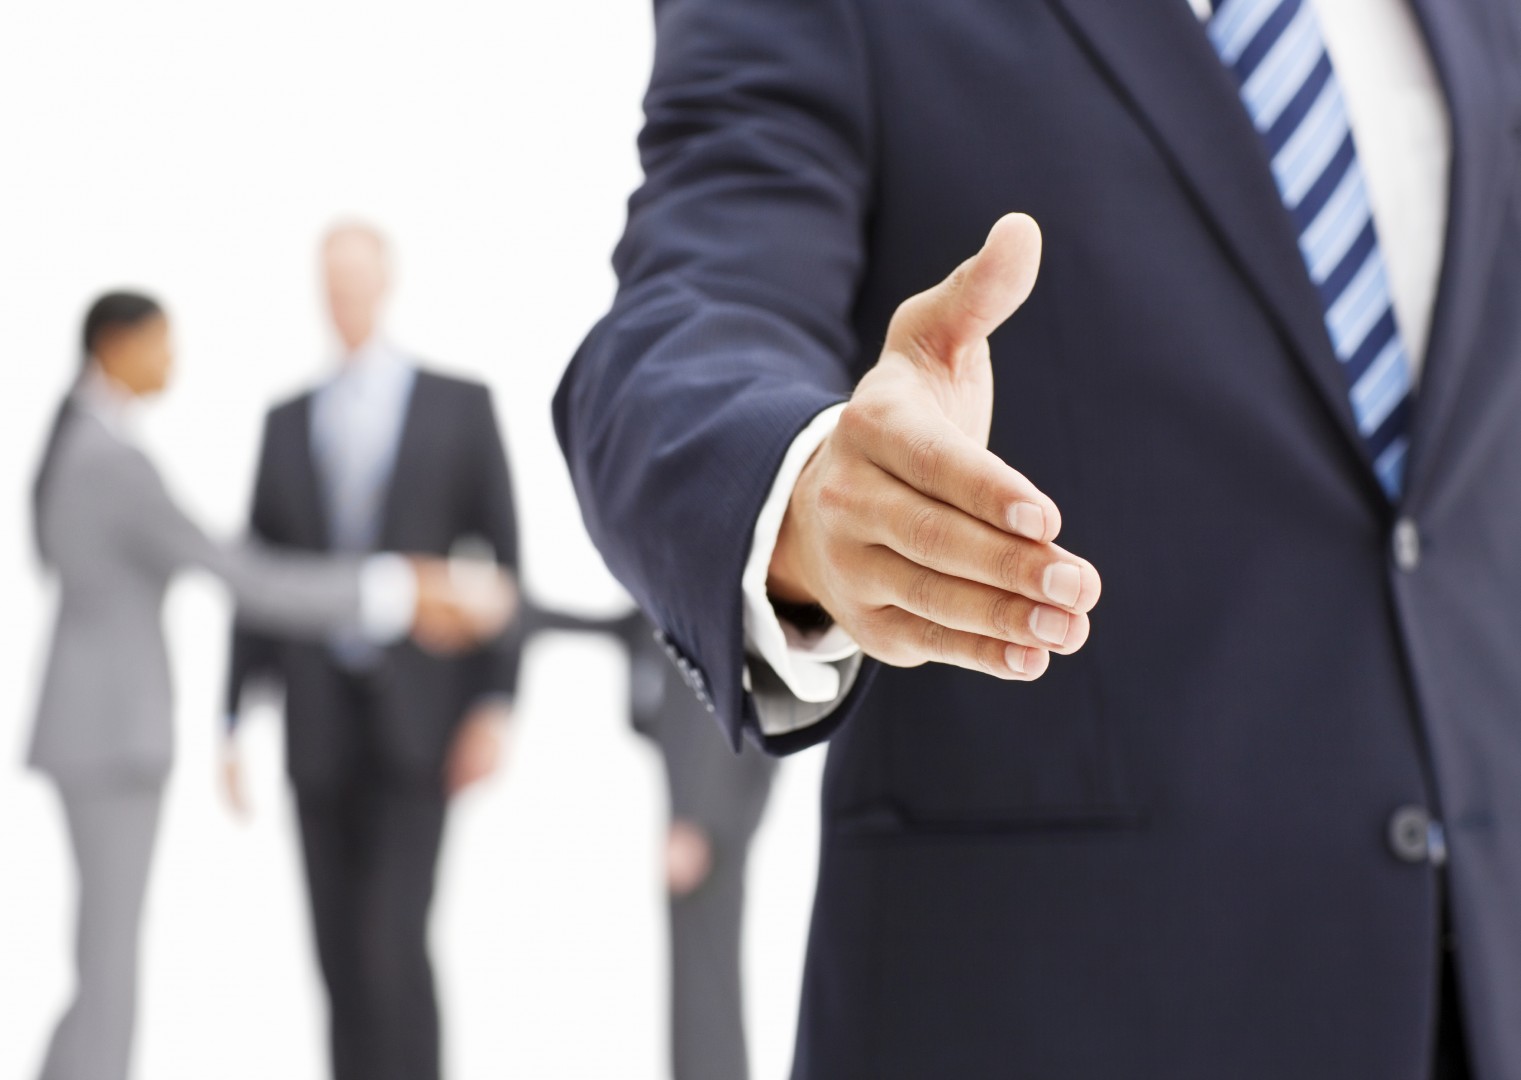 A businessman is seen extending his hand in greeting while other businesspeople stand in the background. Horizontal shot.